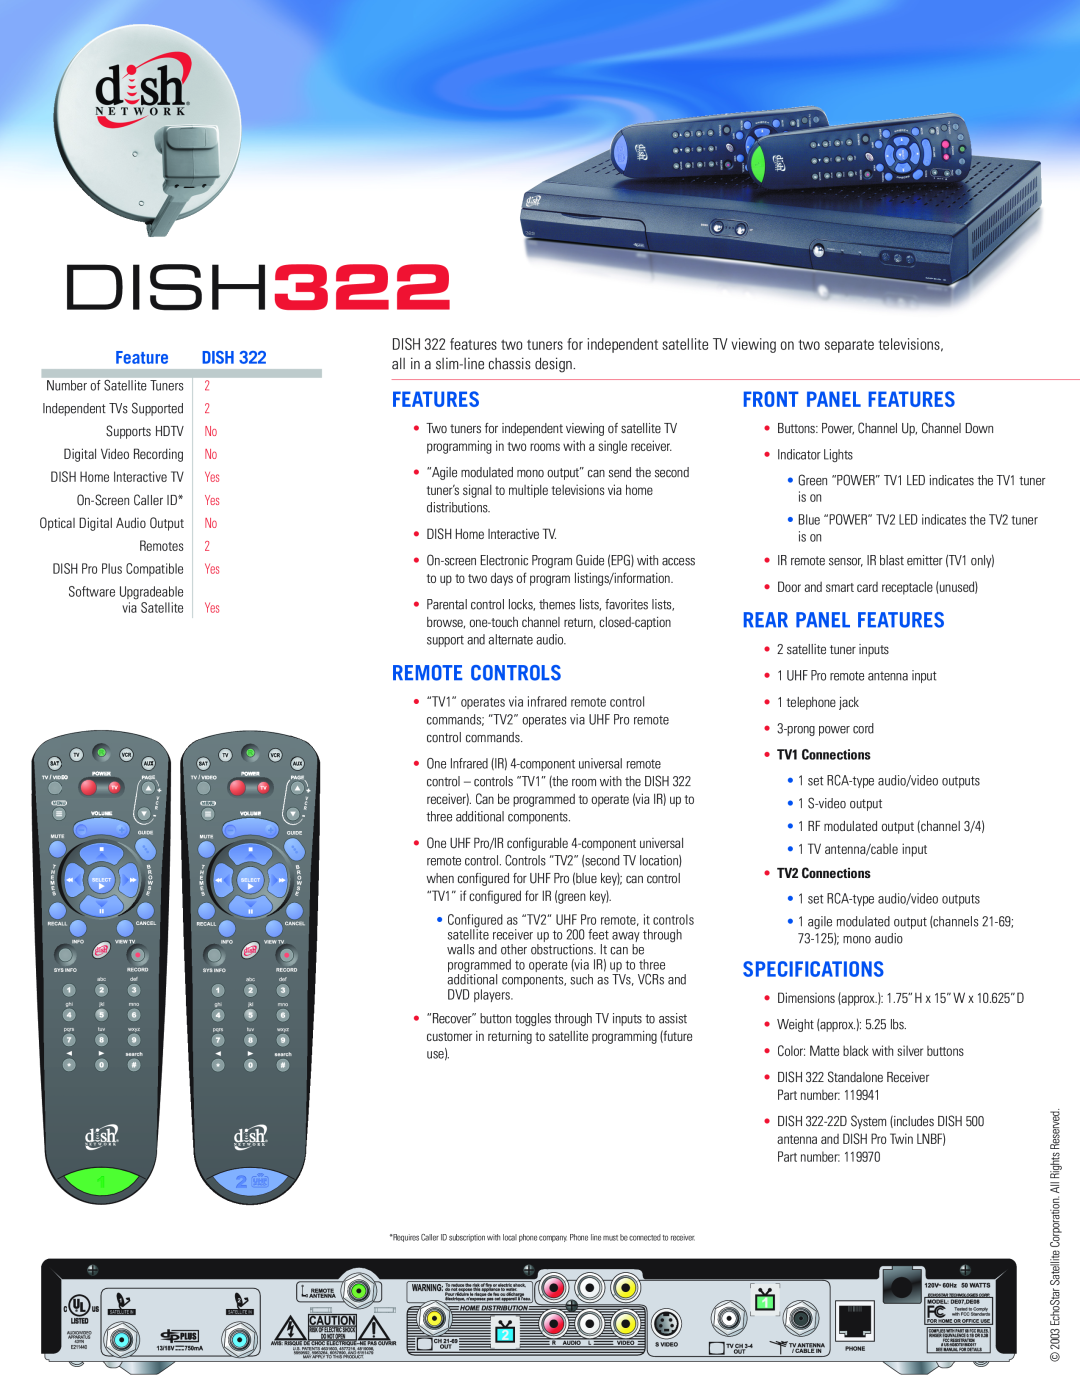 EchoStar DISH 322 manual Remote Controls, Front Panel Features, Rear Panel Features, Specifications, Dish 